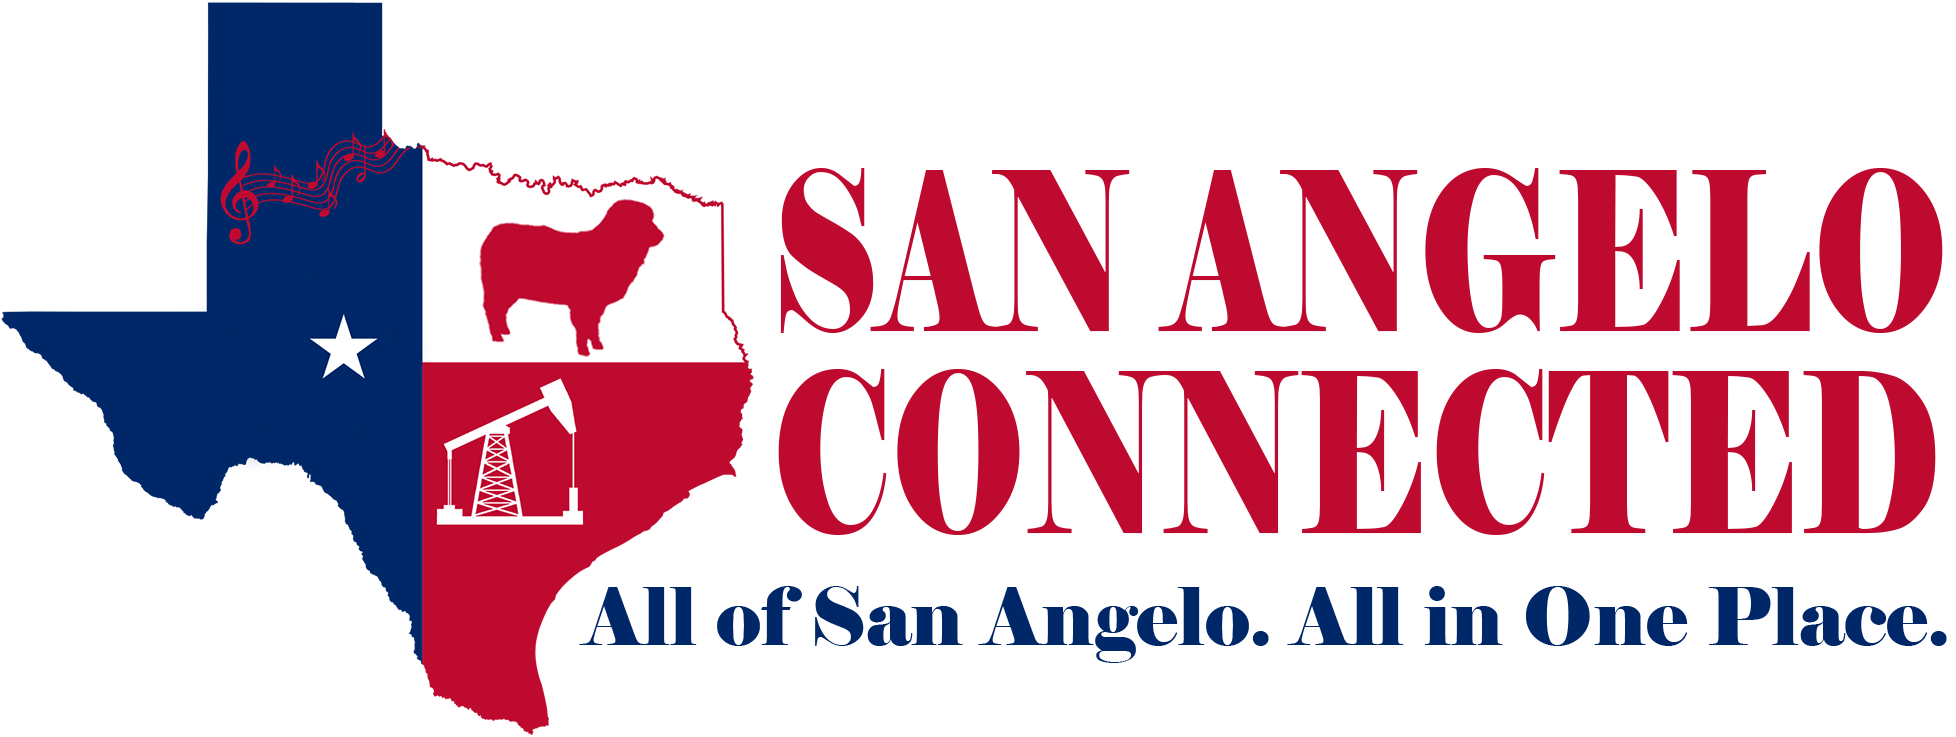 San Angelo Connected